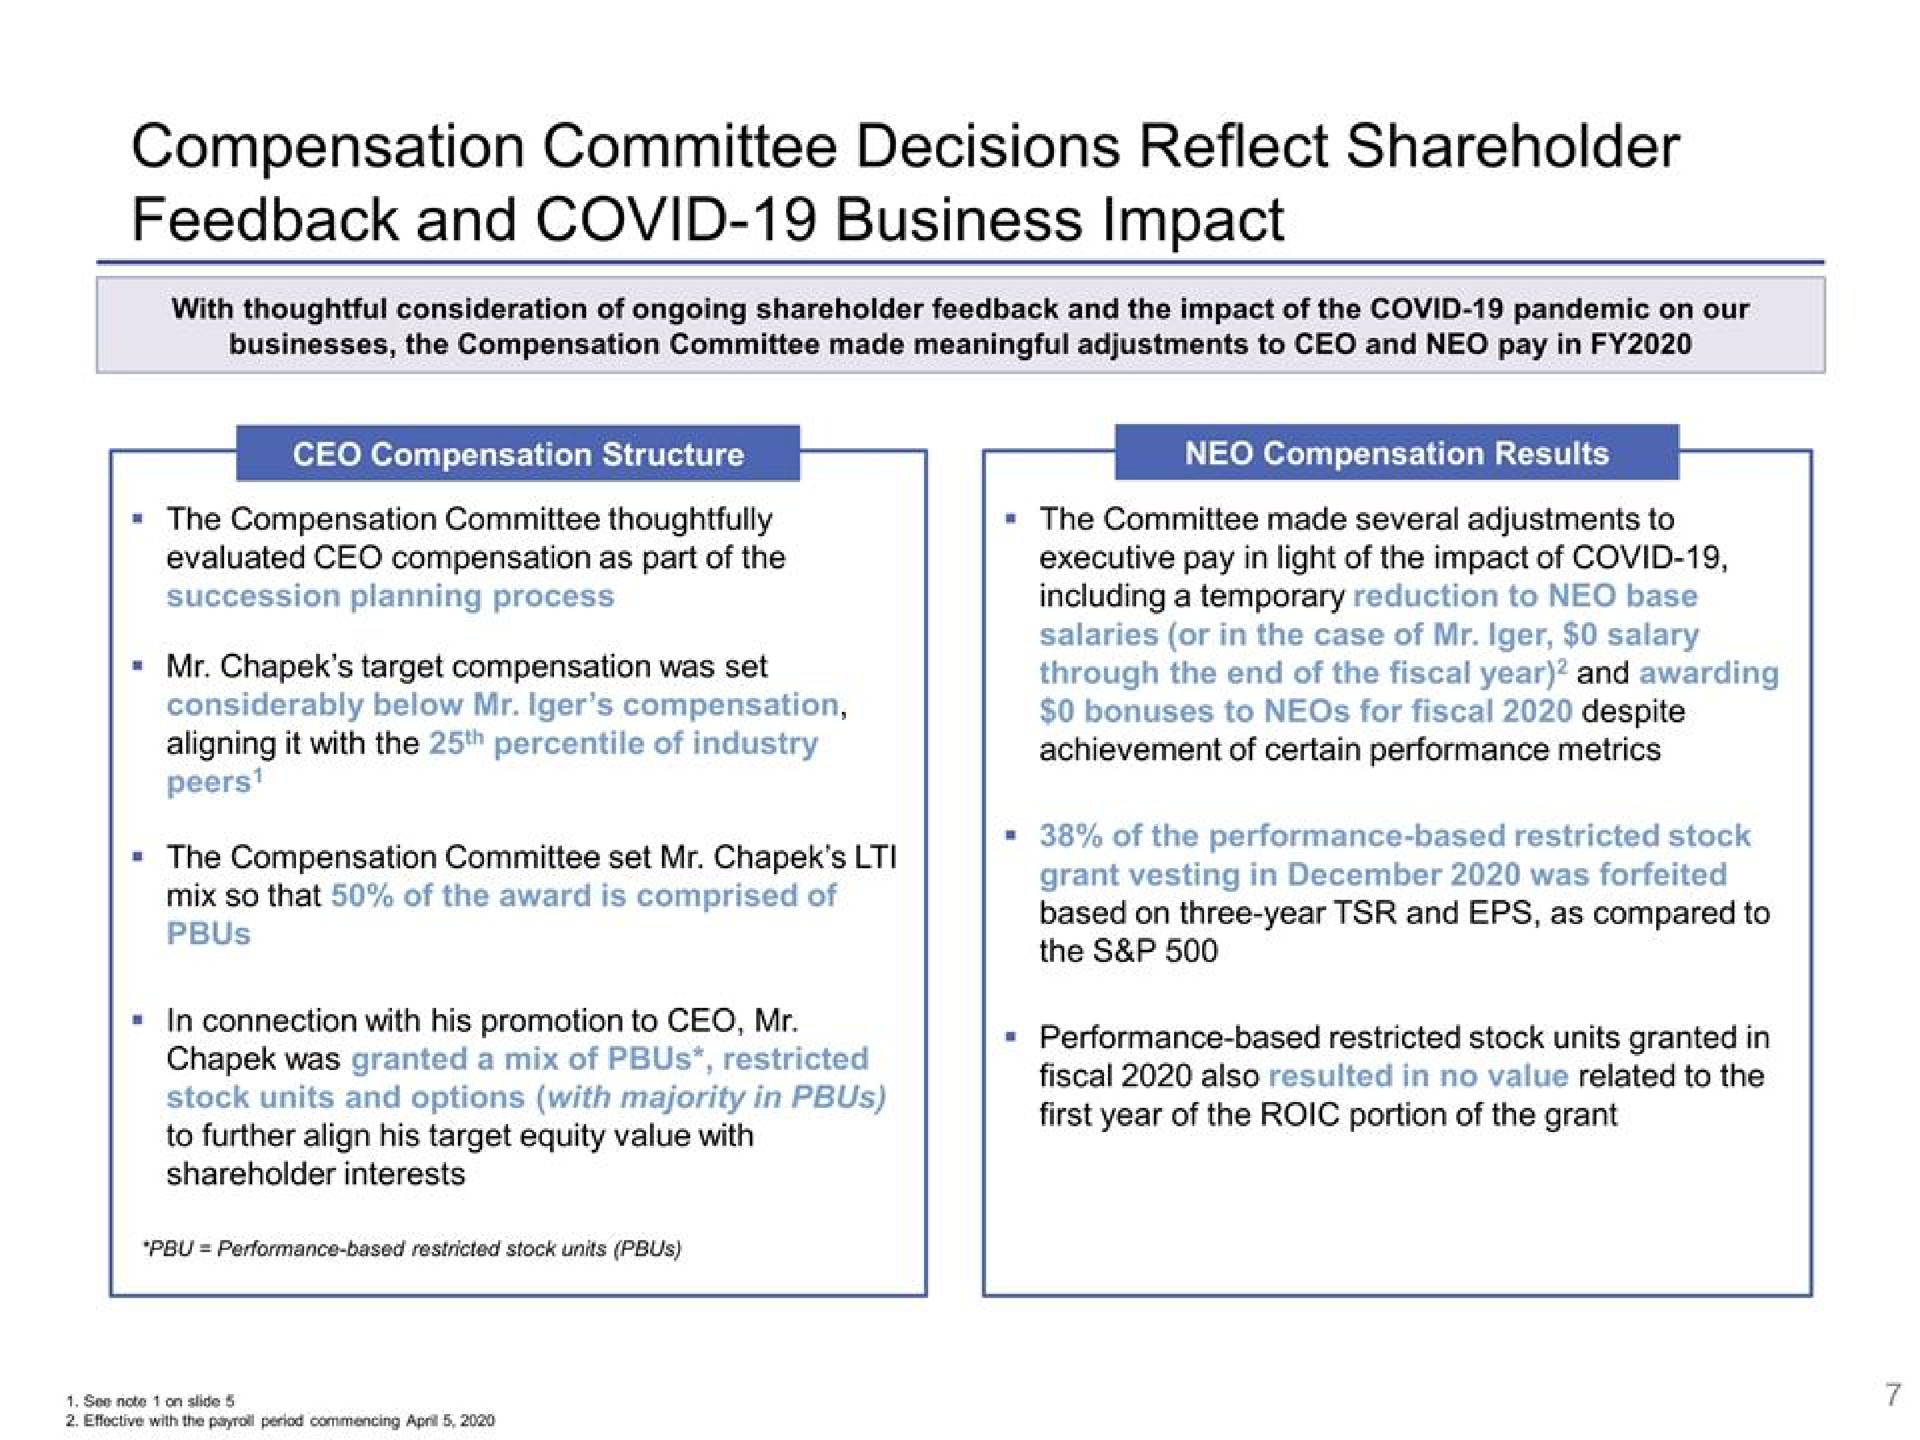 compensation committee decisions reflect shareholder feedback and covid business impact | Disney